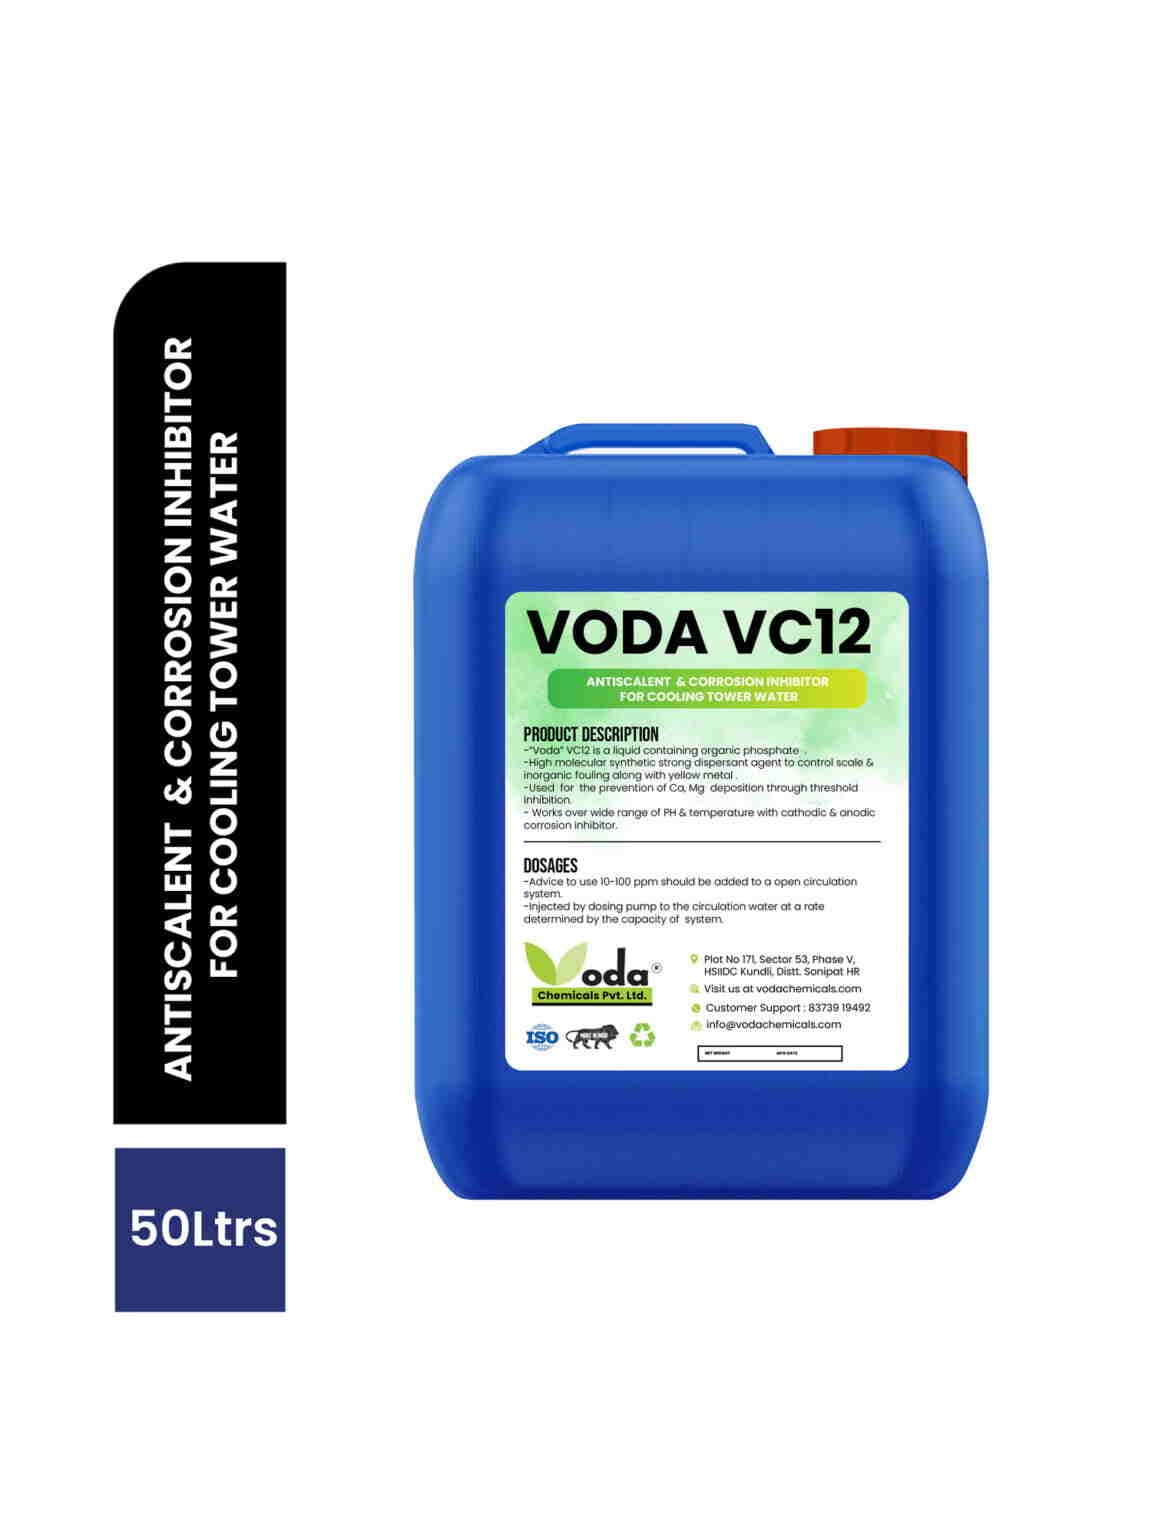 "Voda Feelpure VC12 - A sleek and modern water filtration system. It features advanced purification technology to deliver clean and refreshing drinking water. The system has a user-friendly interface, allowing easy operation and maintenance. Perfect for home or office use."